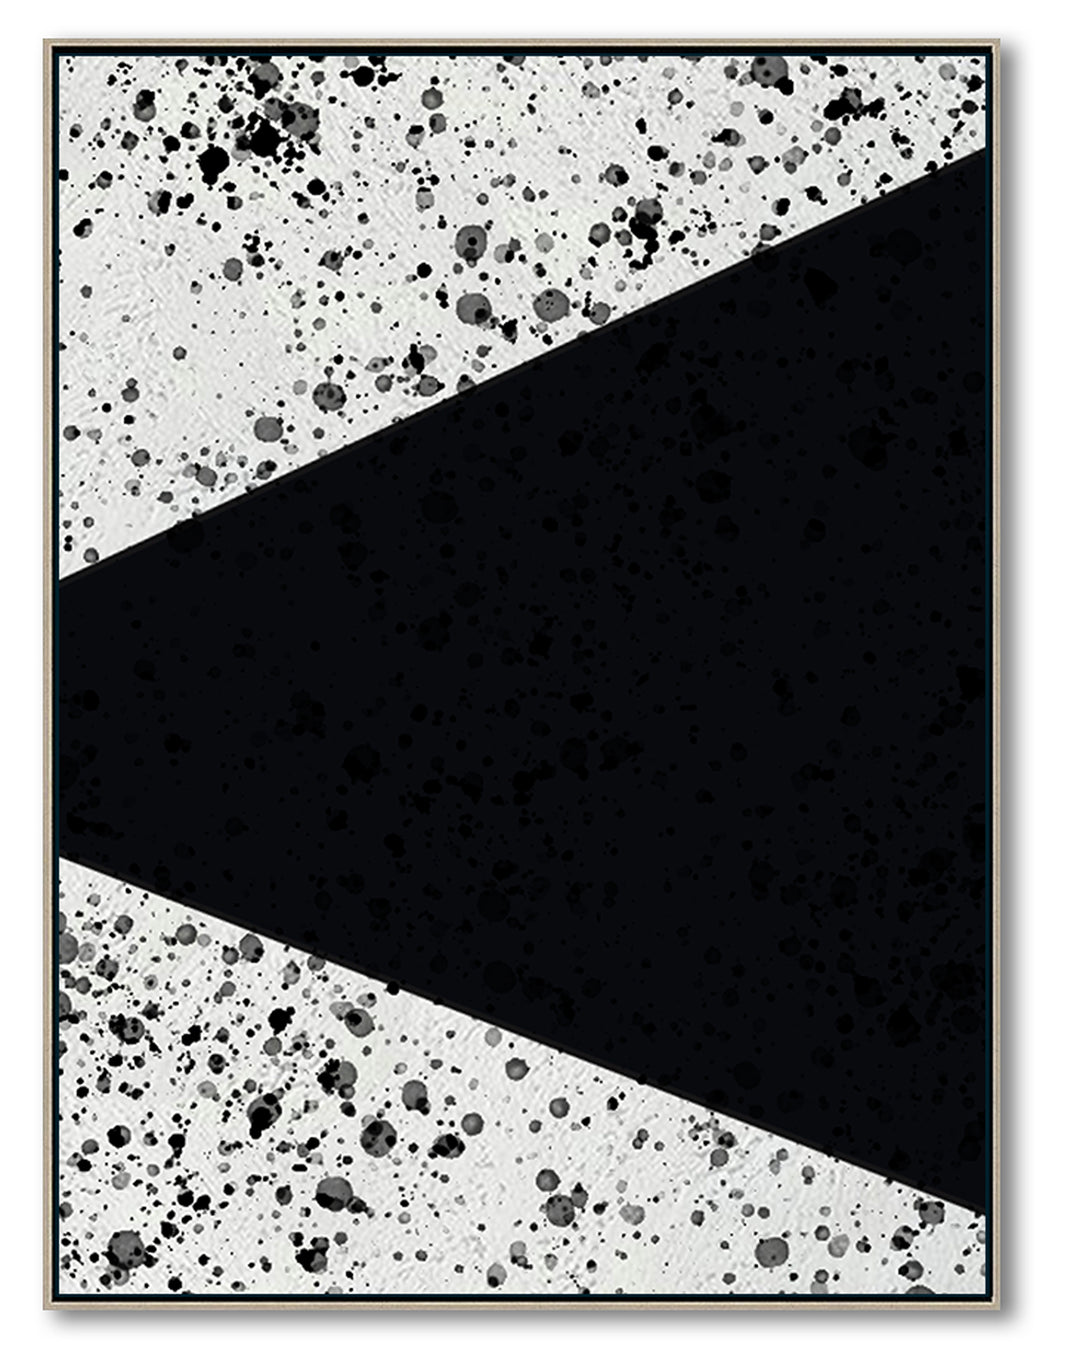 Modern Abstract Wall Art, Original Oil Painting, Geometry Black and White Living Room Wall Art Decor no. 106